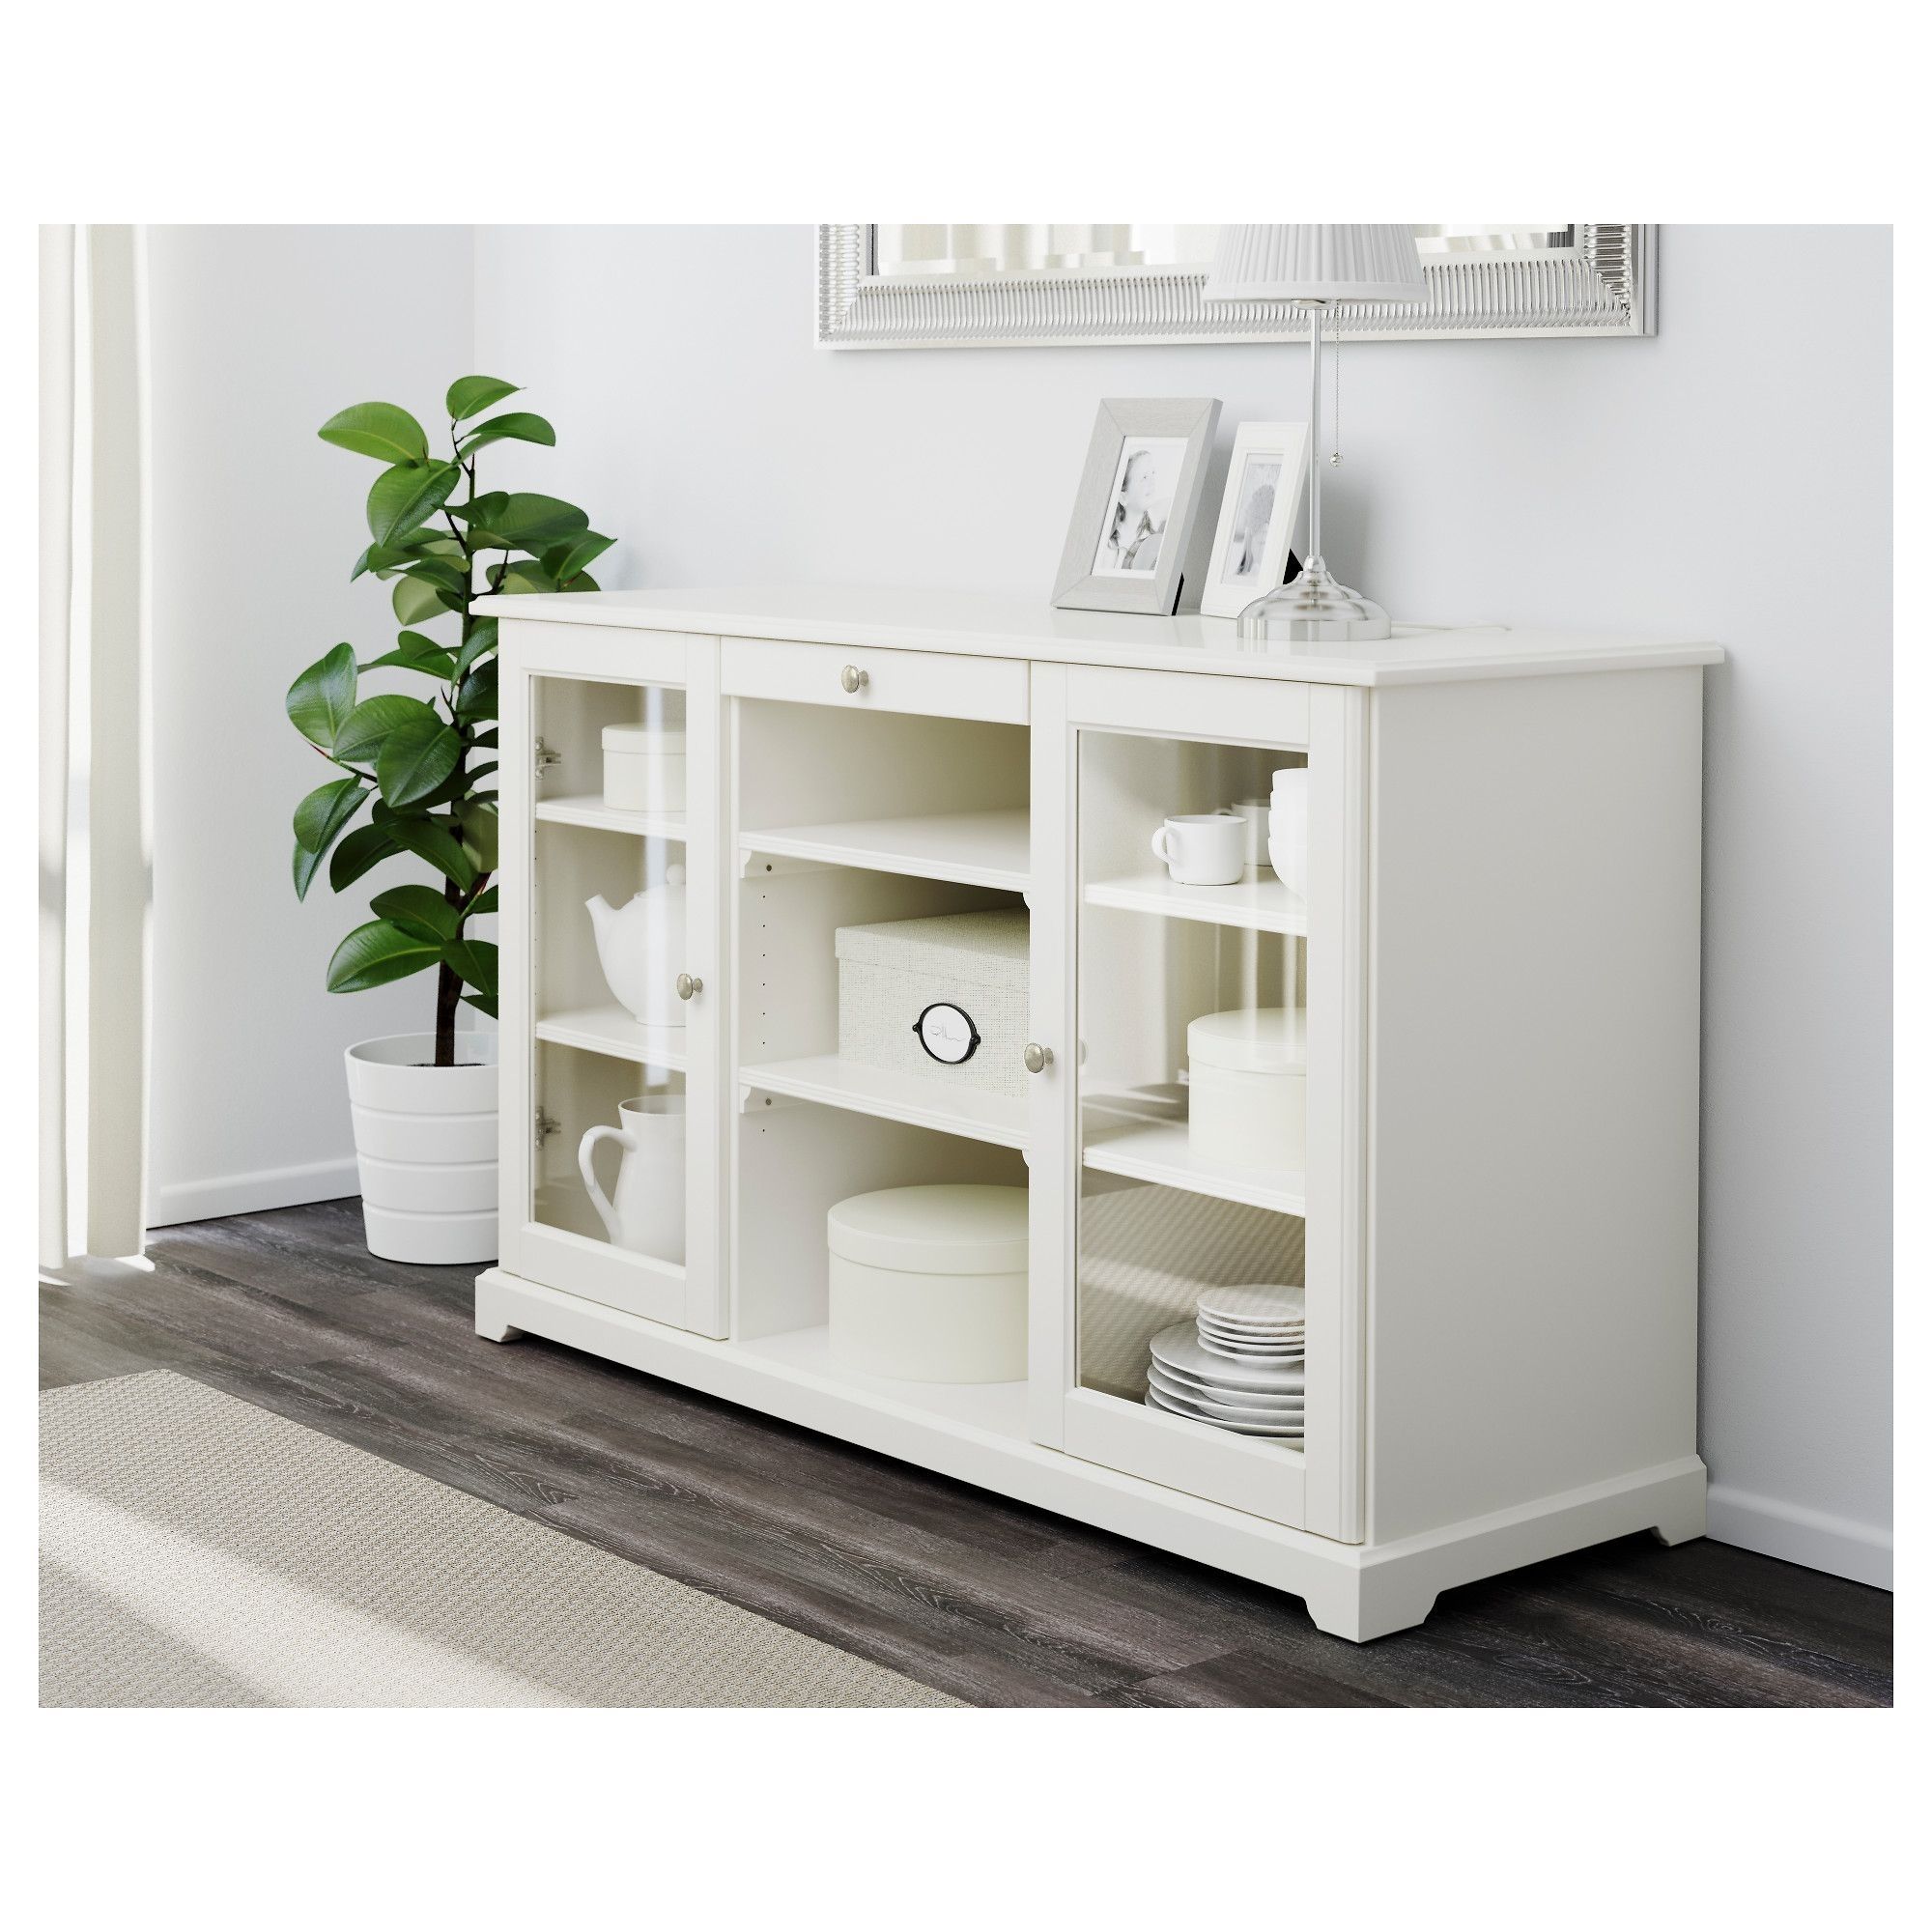 Liatorp Sideboard, White | Time To Redecorate! | Pinterest In Best And Newest Open Shelf Brass 4 Drawer Sideboards (View 17 of 20)